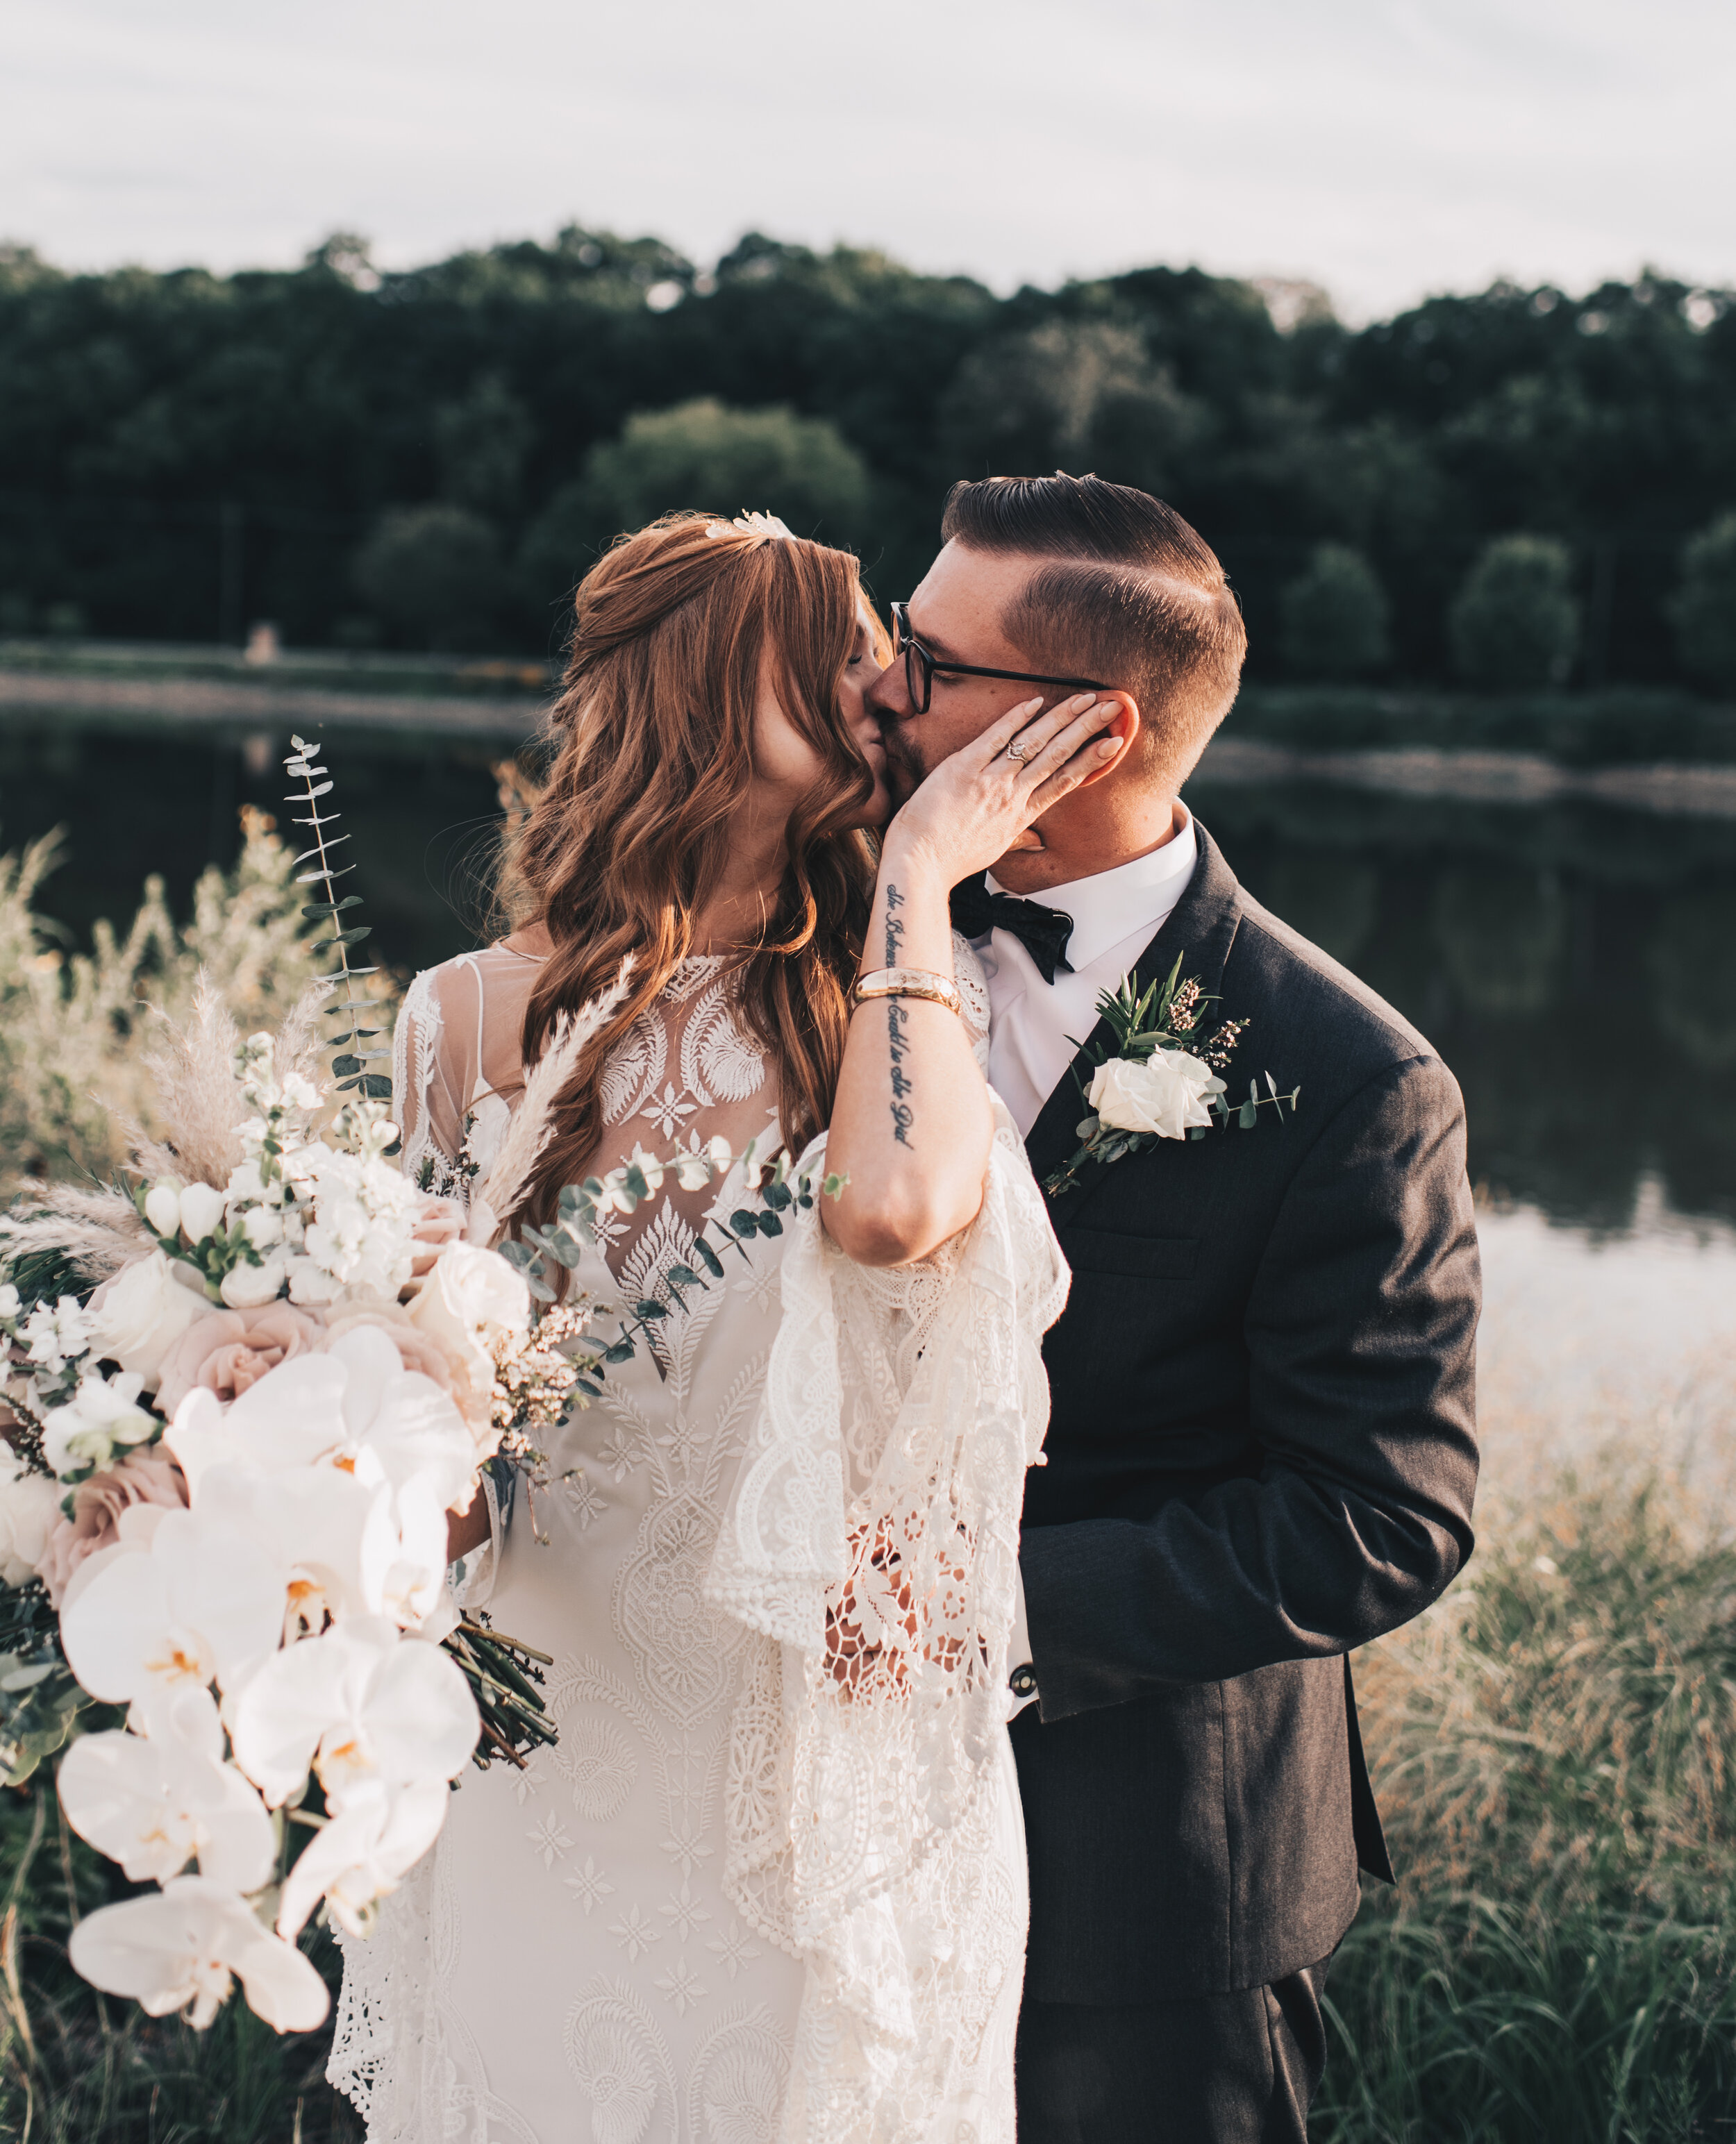 Modern Industrial Wedding, The Brix on the Fox, The BRIX, Chicago Industrial Wedding, Modern Midwest Wedding, The Brix on the Fox Wedding, The BRIX Wedding, Outdoor Boho Bride and Groom Photos